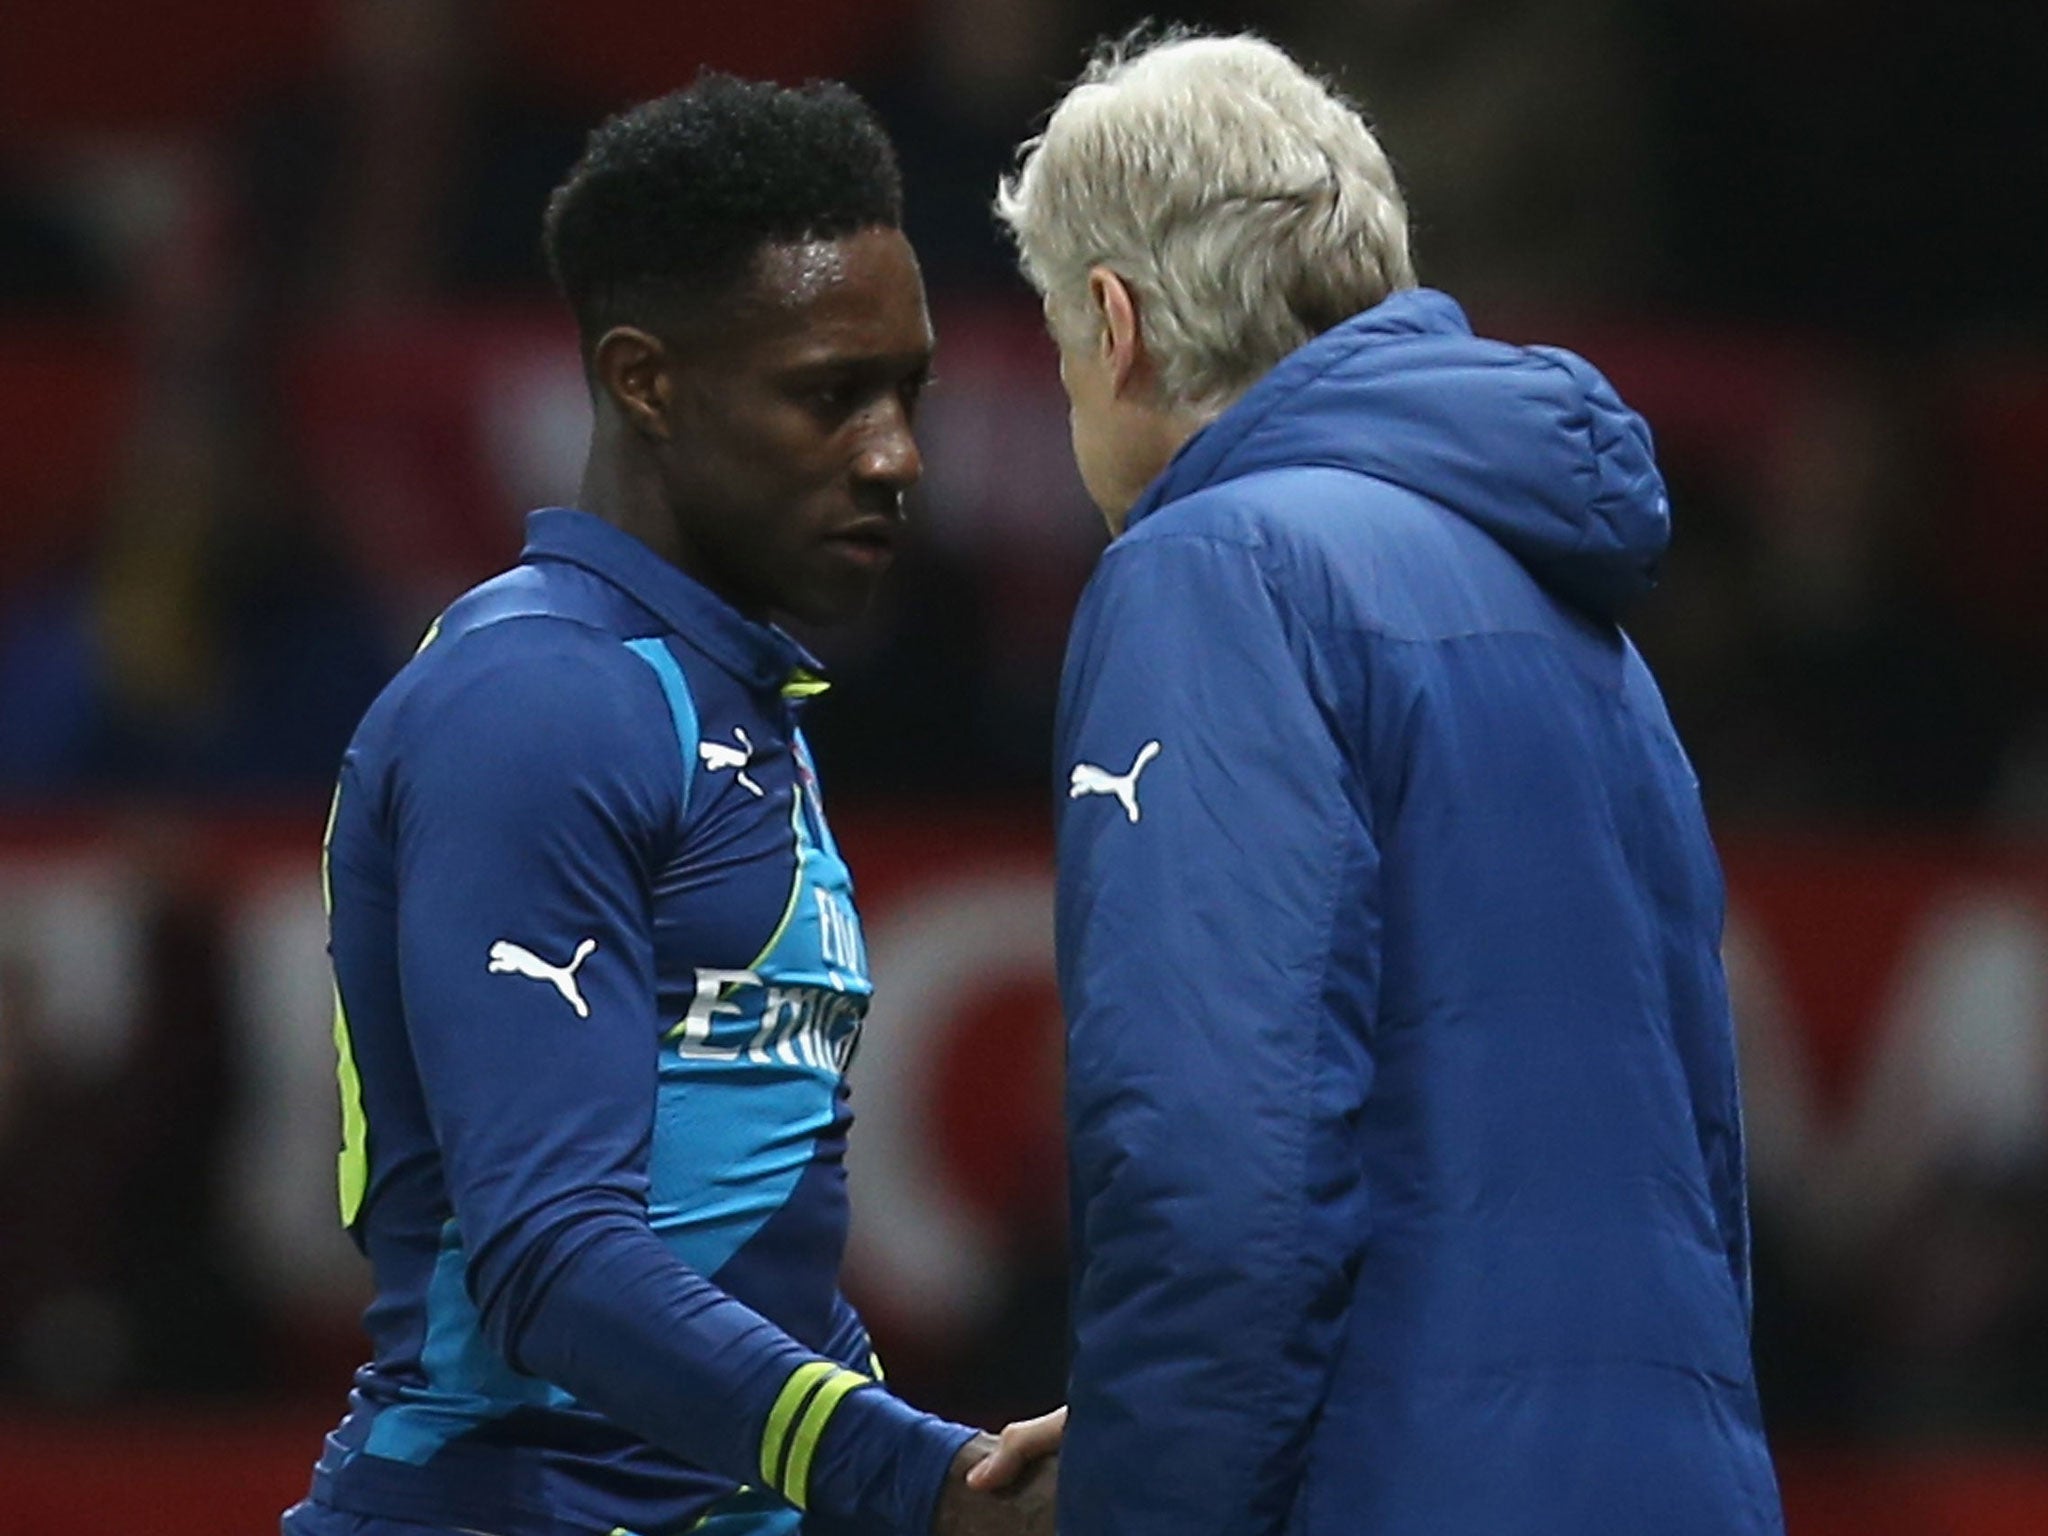 Welbeck will not be available to face Crystal Palace due to injury